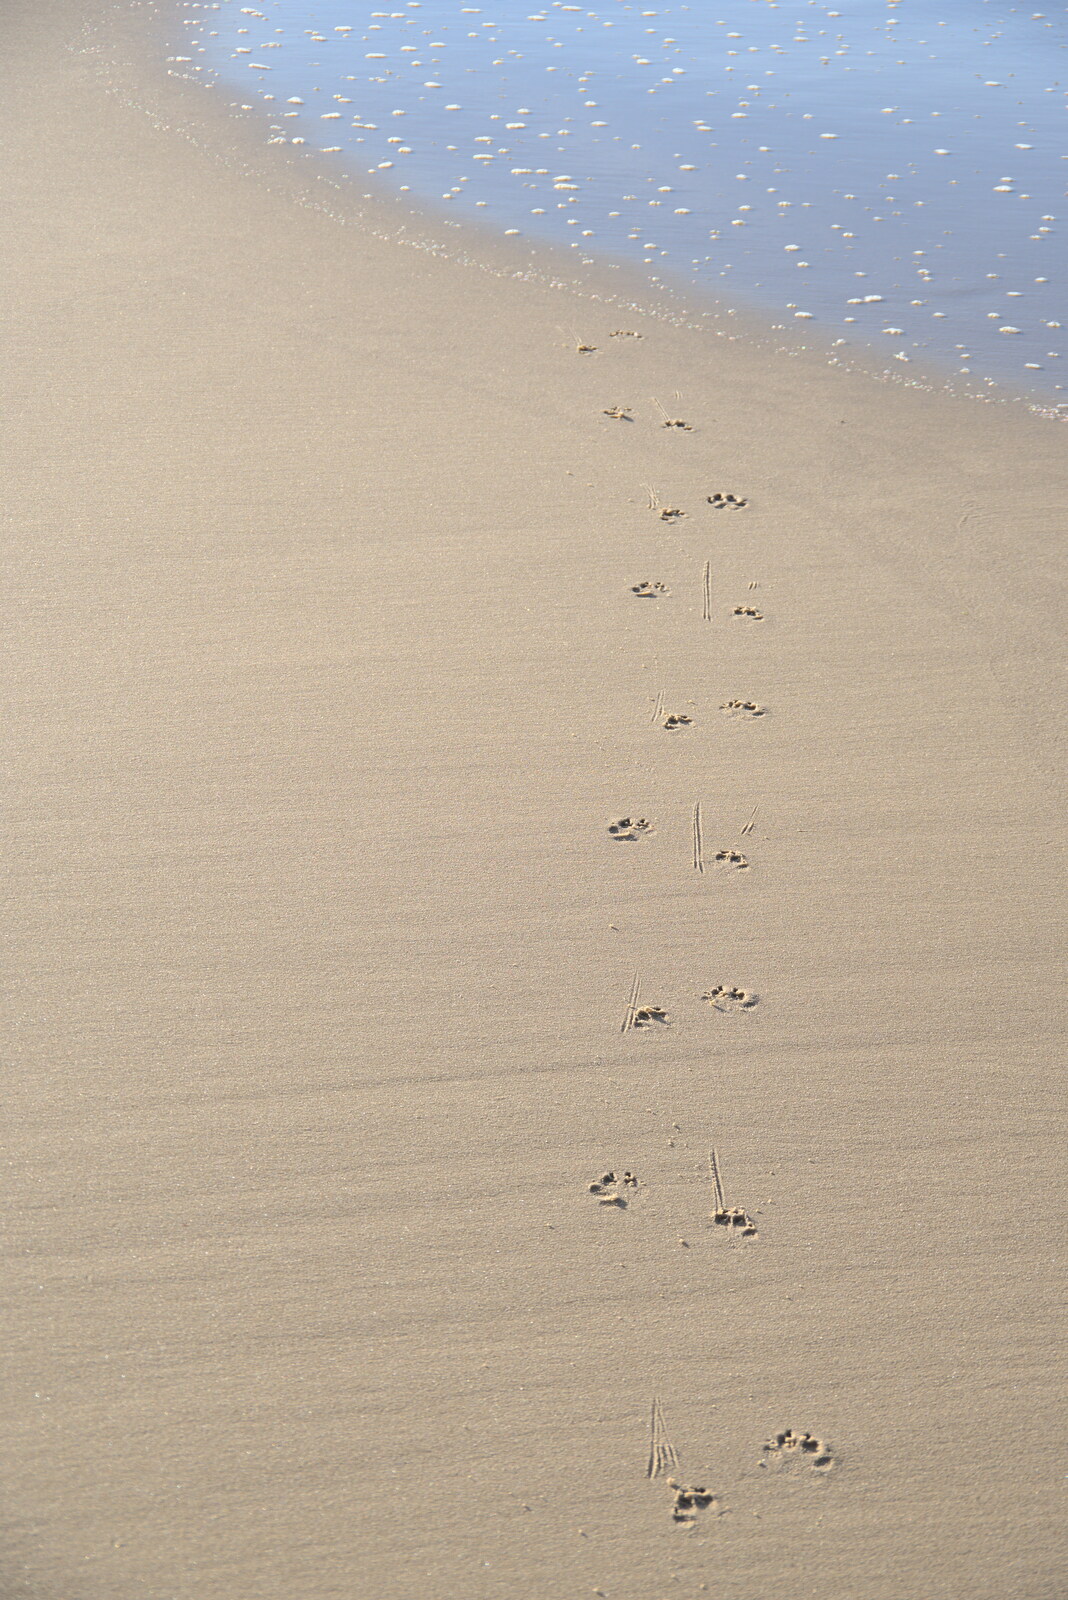 Dog paw prints in the sand from Camping in the Dunes, Waxham Sands, Norfolk - 9th July 2022